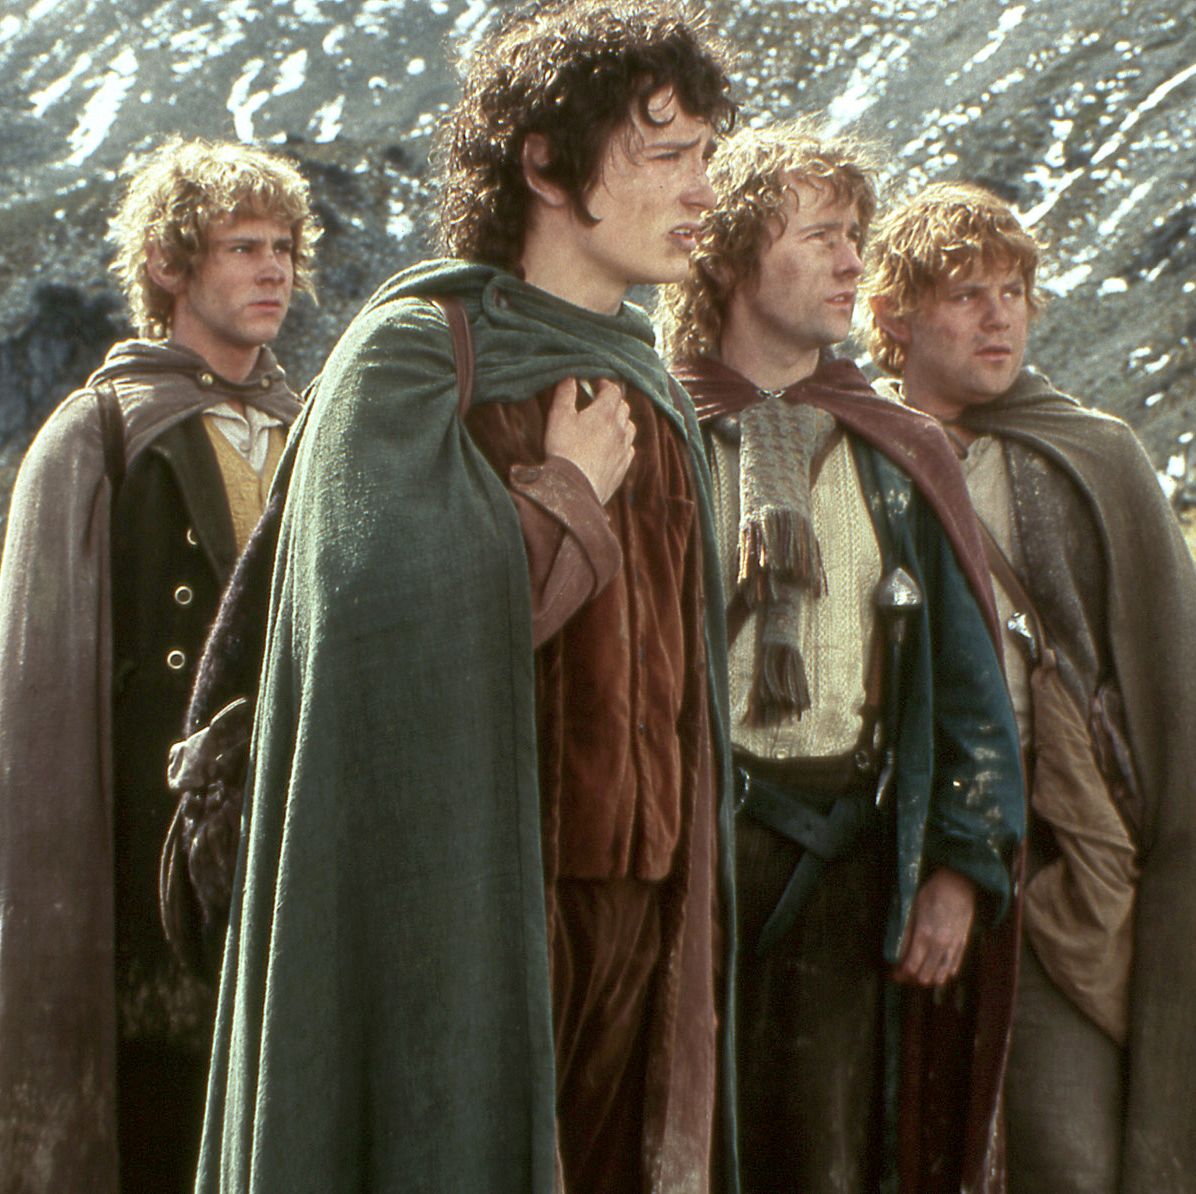 Lord of the Rings: Return of the King ended an age (not just the